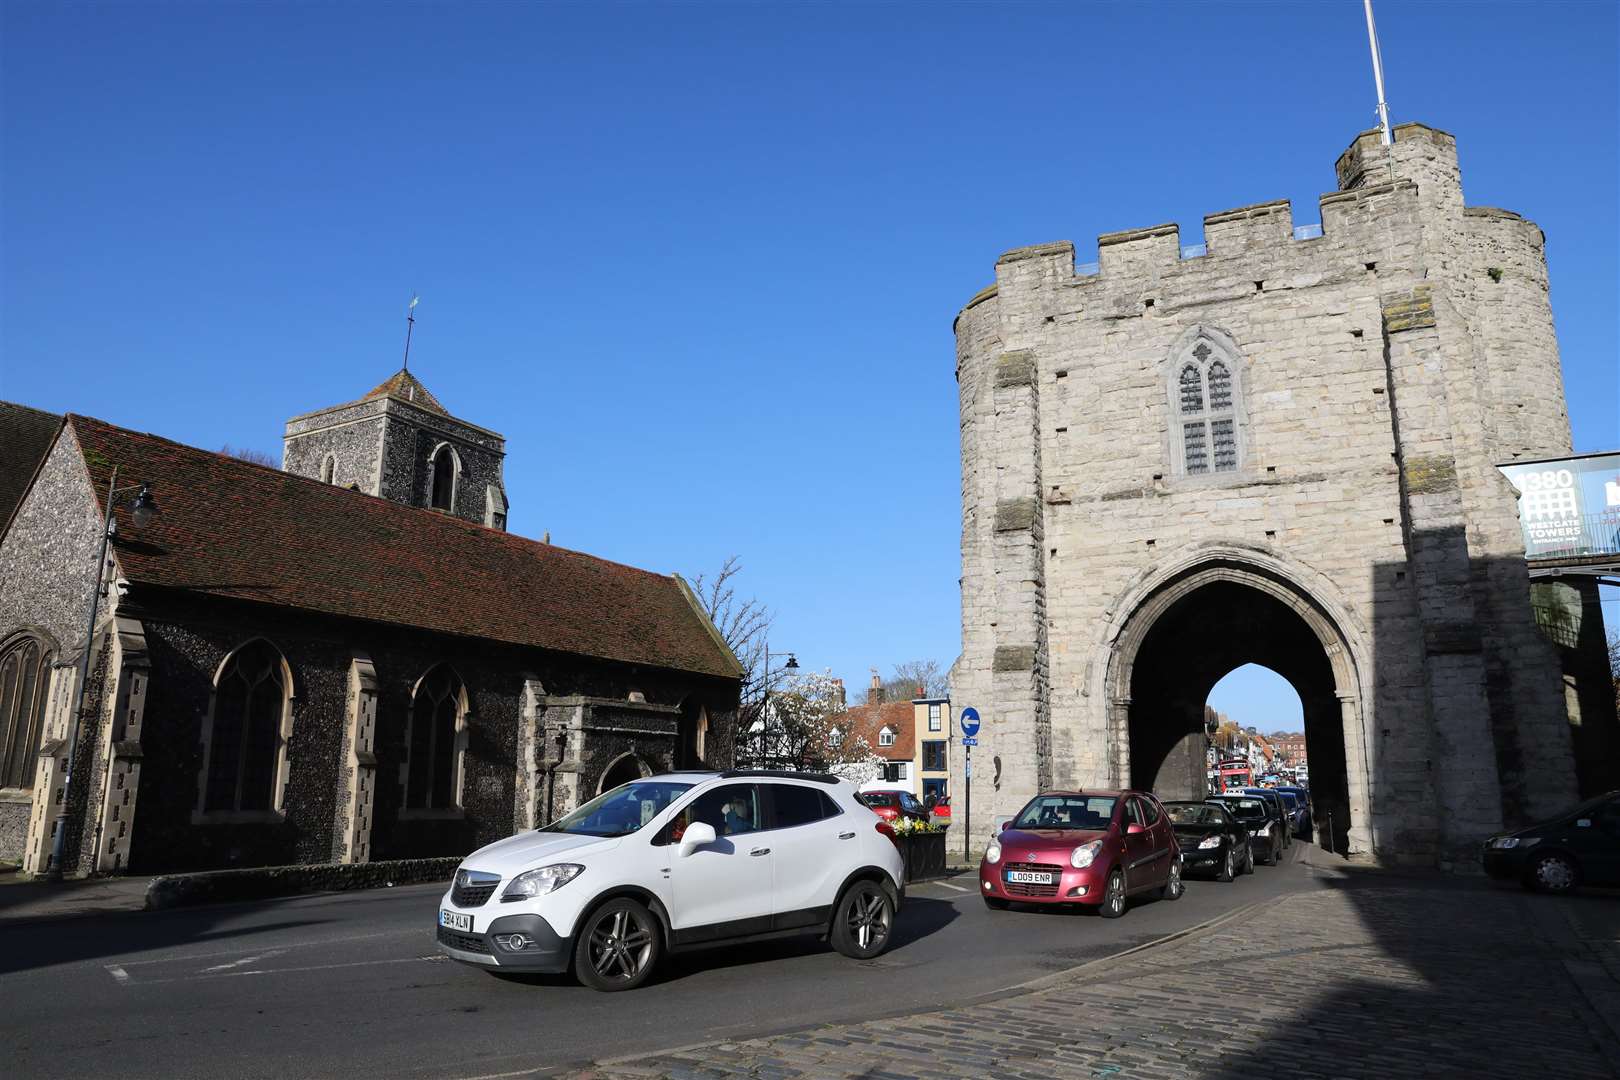 The area outside Westgate Towers could become a new square which would be more pedestrian-friendly